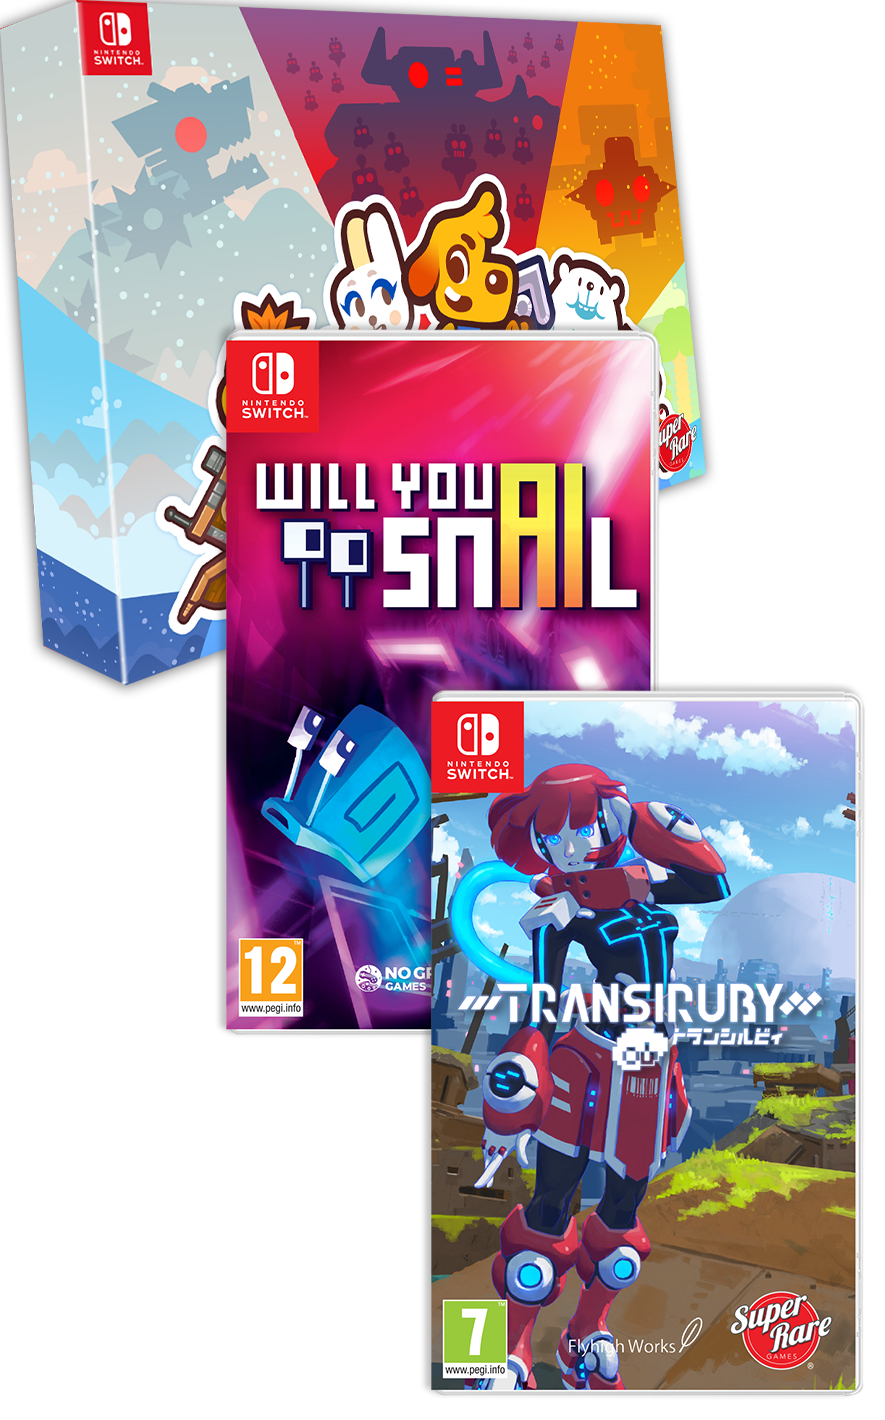 [Collectors Edition] PB#23: Grapple Dog, Will You Snail?, Transiruby (Switch)